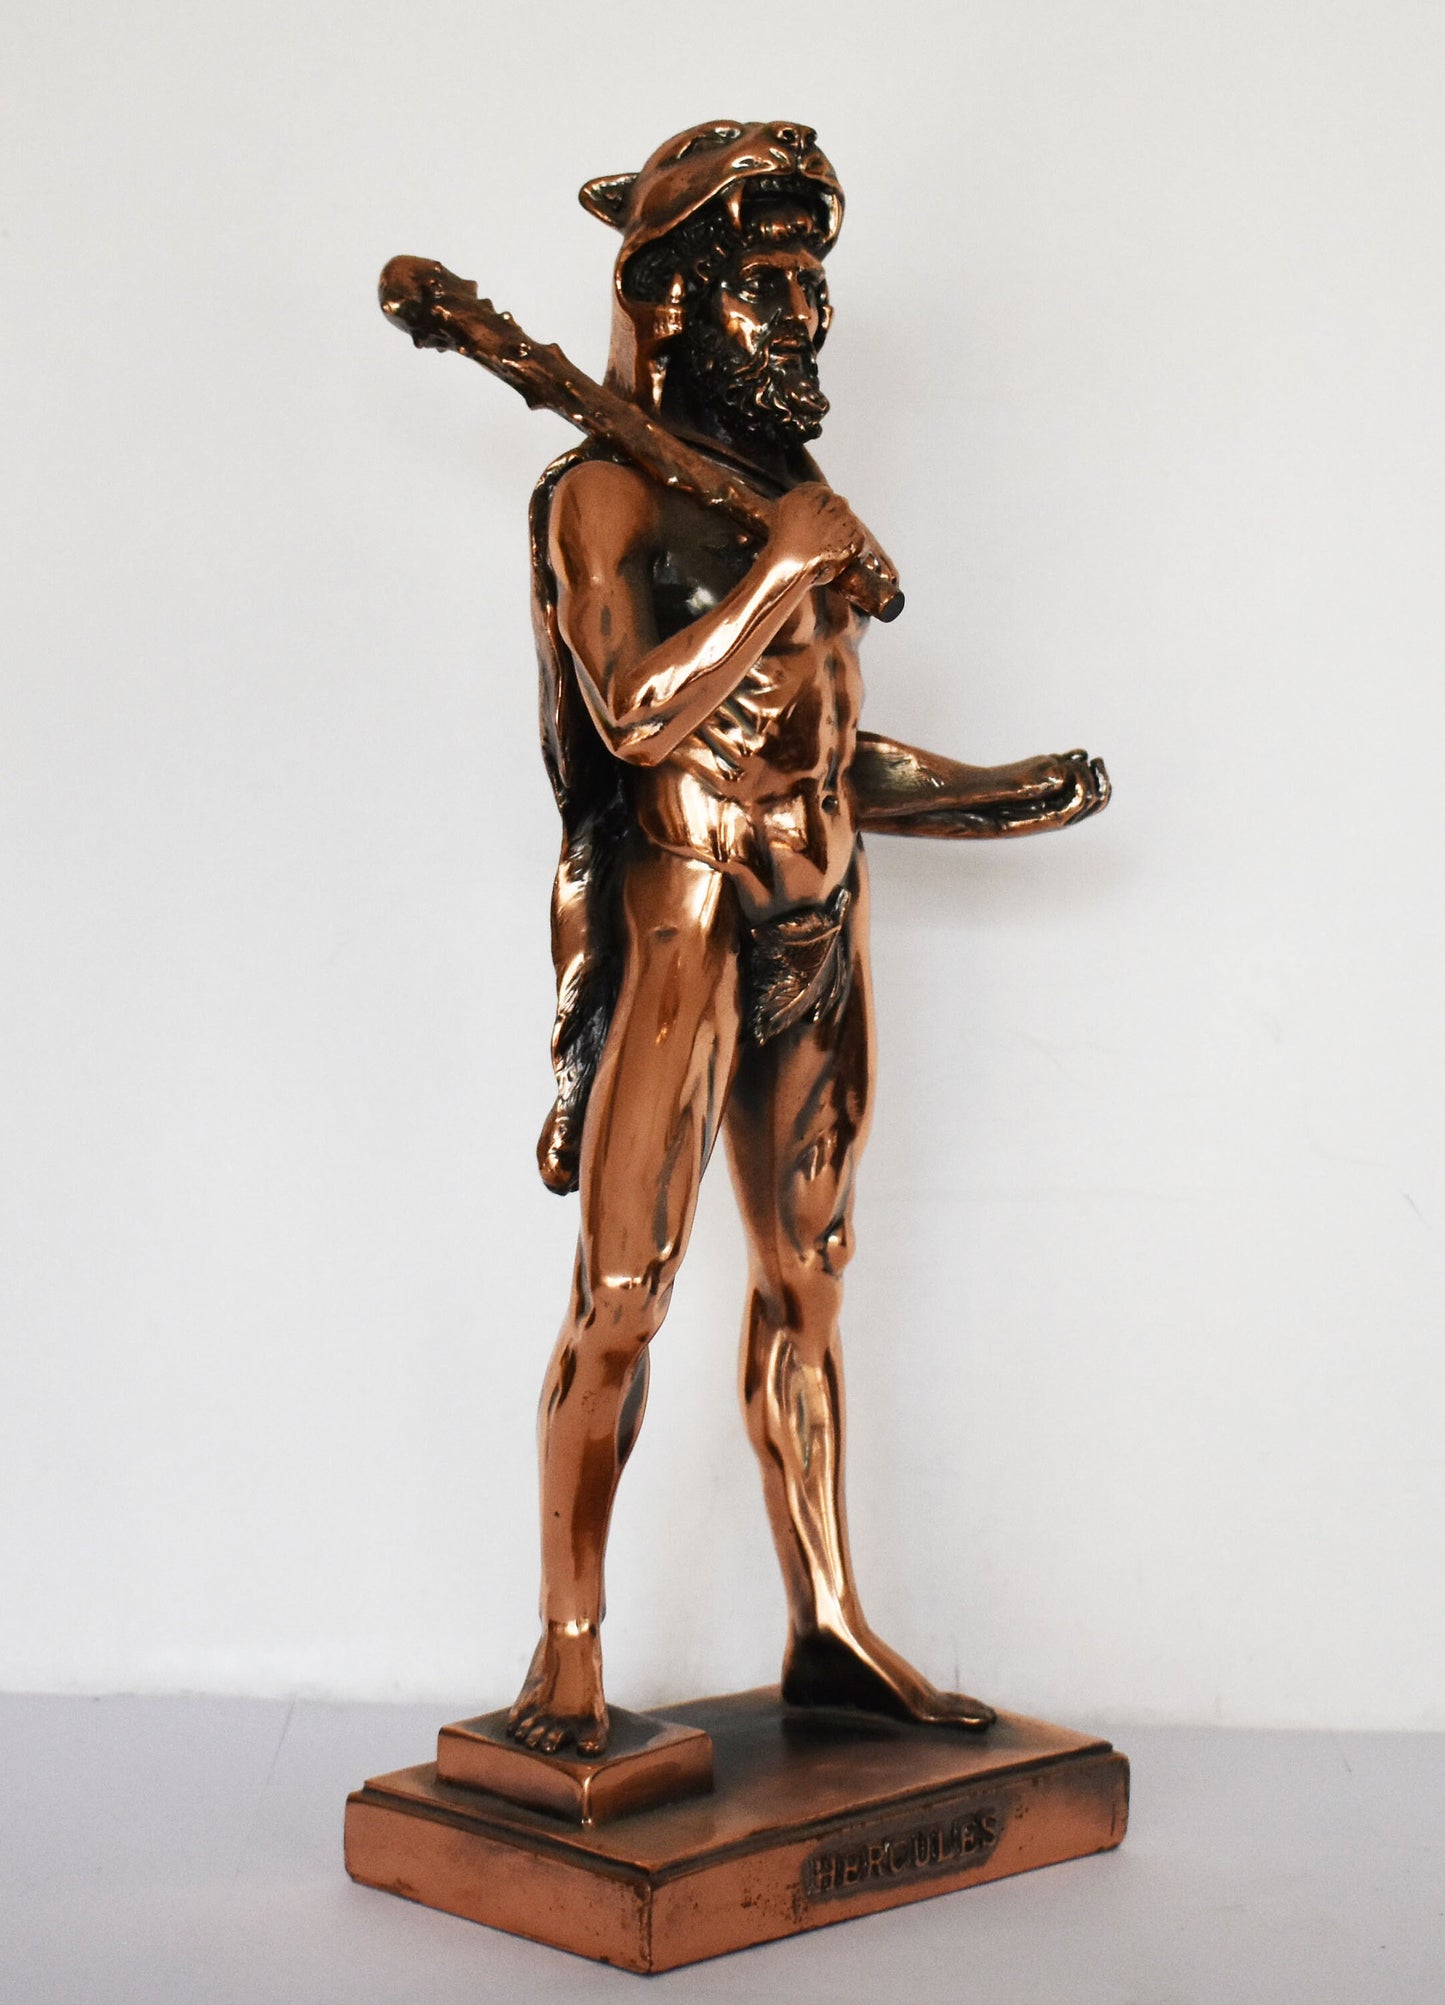 Hercules - Heracles - Son of Zeus and Alcmene - Greek Divine Hero - The 12 Labours - Strong, Brave and Masculine - Copper Plated Alabaster